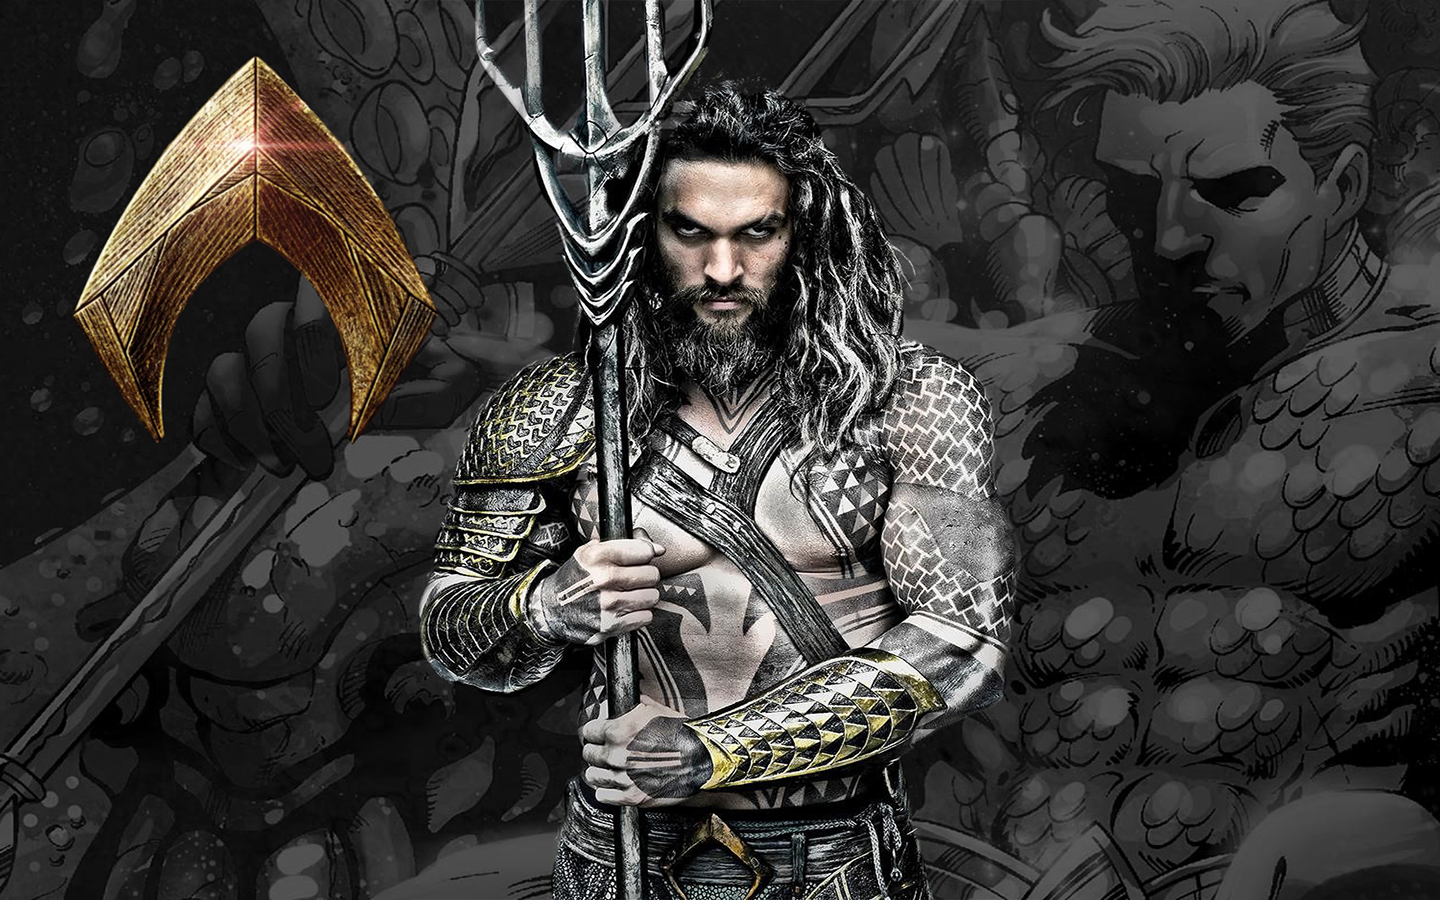 Aquaman Release Date Pushed Back to December 2018